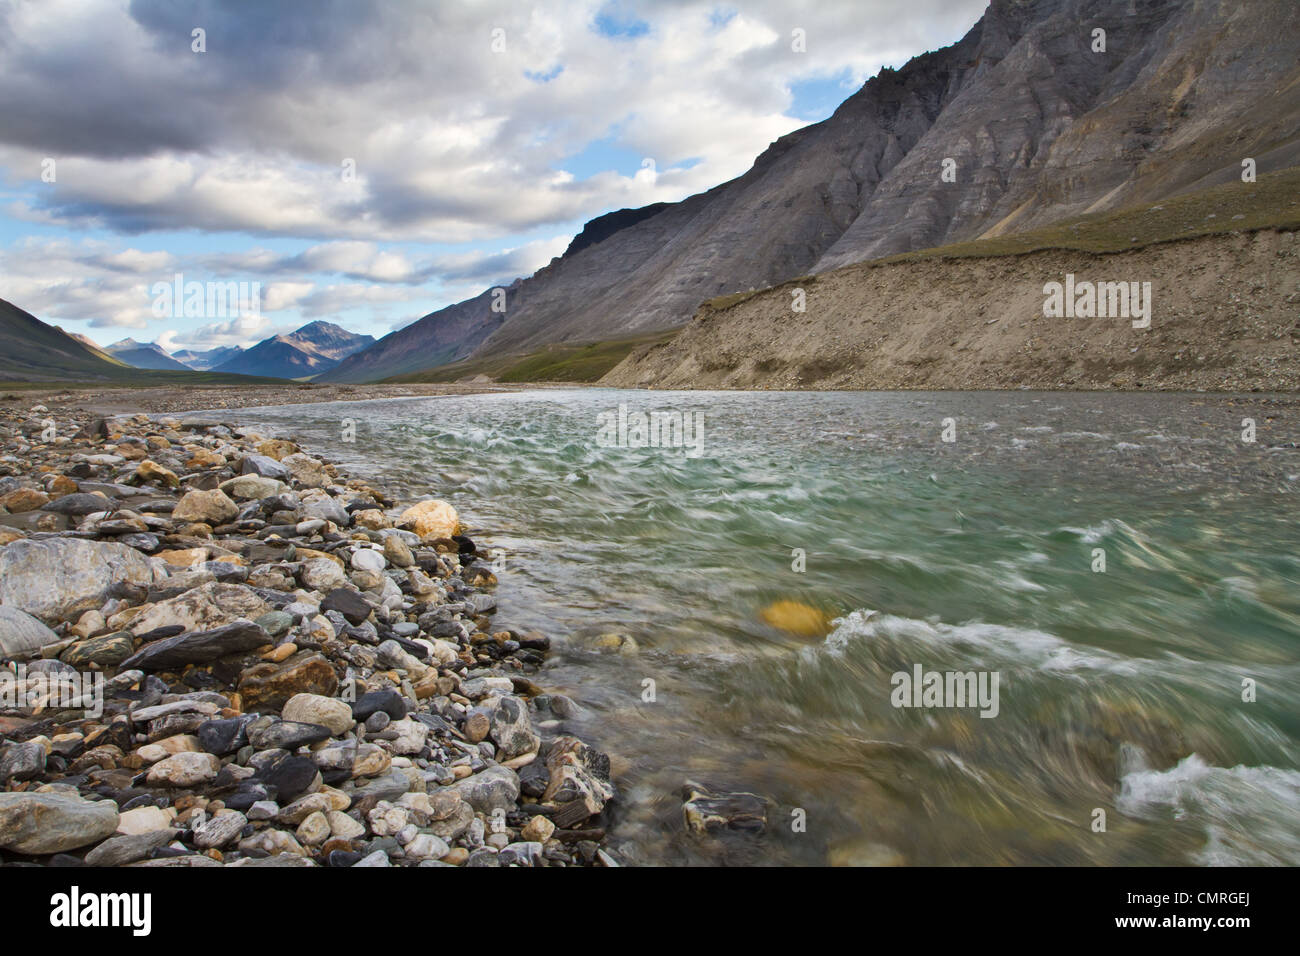 The Kugrak River, a tributary to the Noatak River, flows down its valley in Gates of the Arctic National Park, AK, USA. Stock Photo